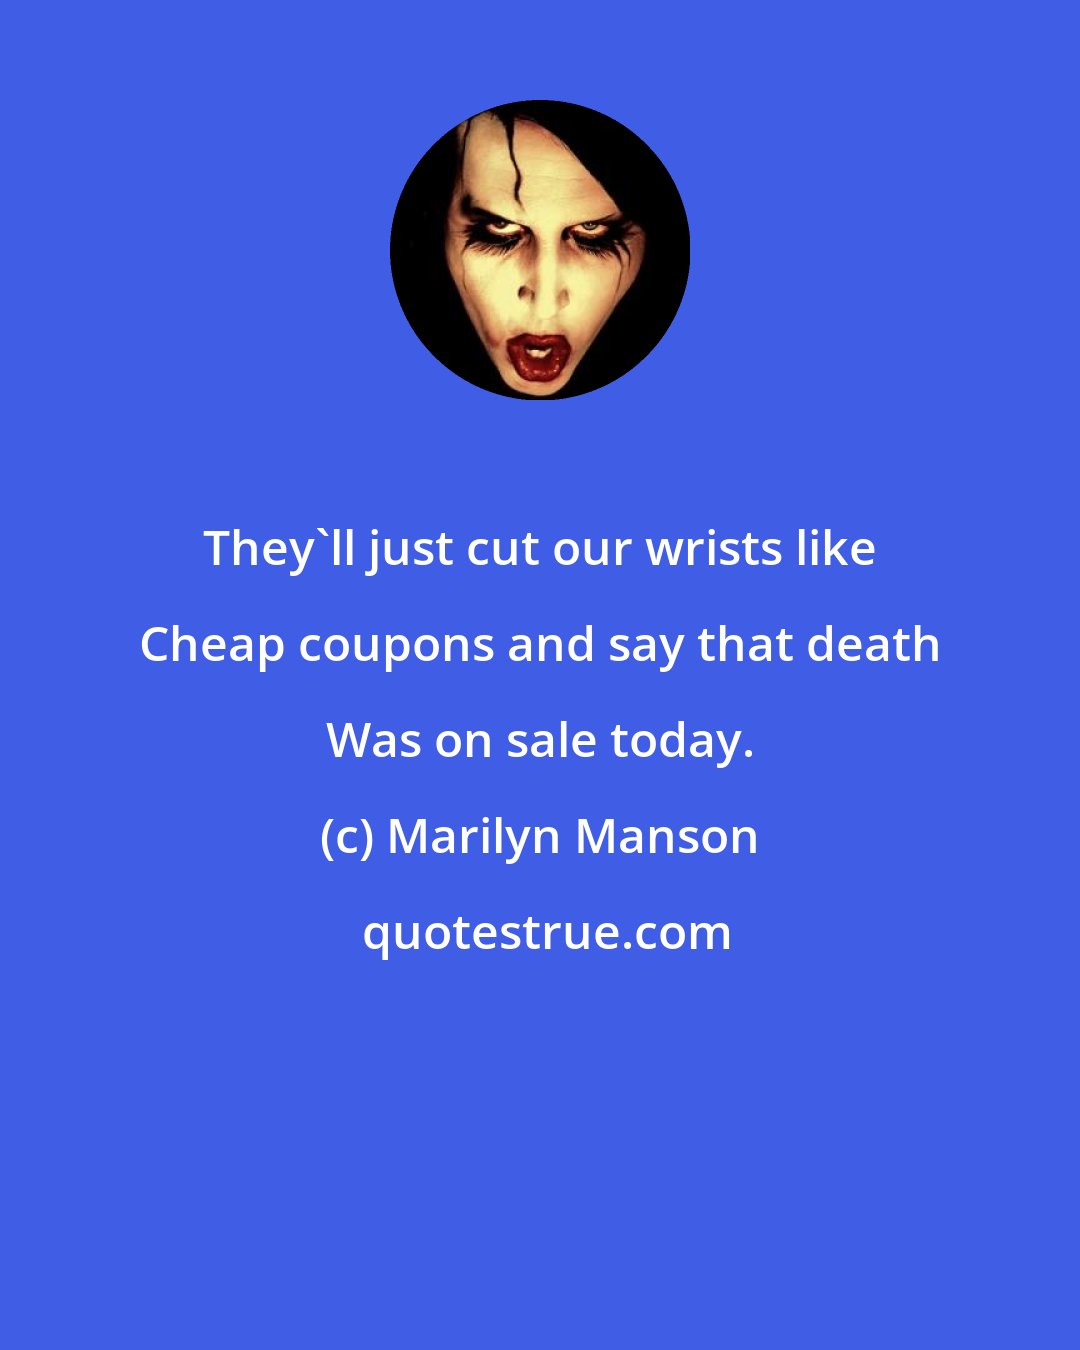 Marilyn Manson: They'll just cut our wrists like Cheap coupons and say that death Was on sale today.